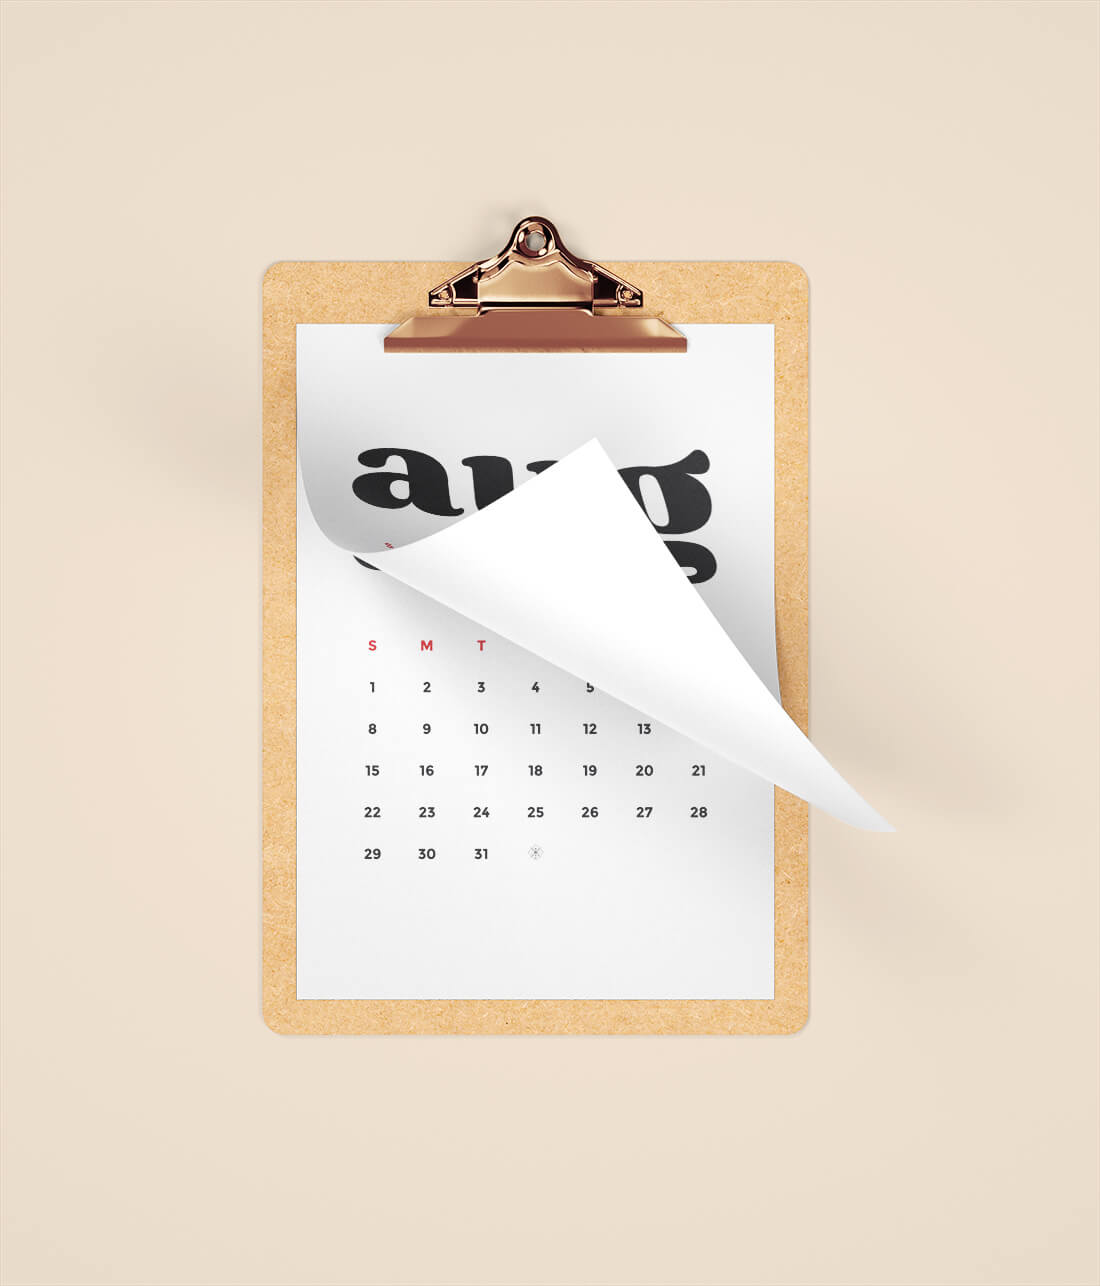 Little Gold Pixel • Free Printable 2021 Calendar • Download and print today! • Picture is a mockup of the 2021 calendar in a clipboard